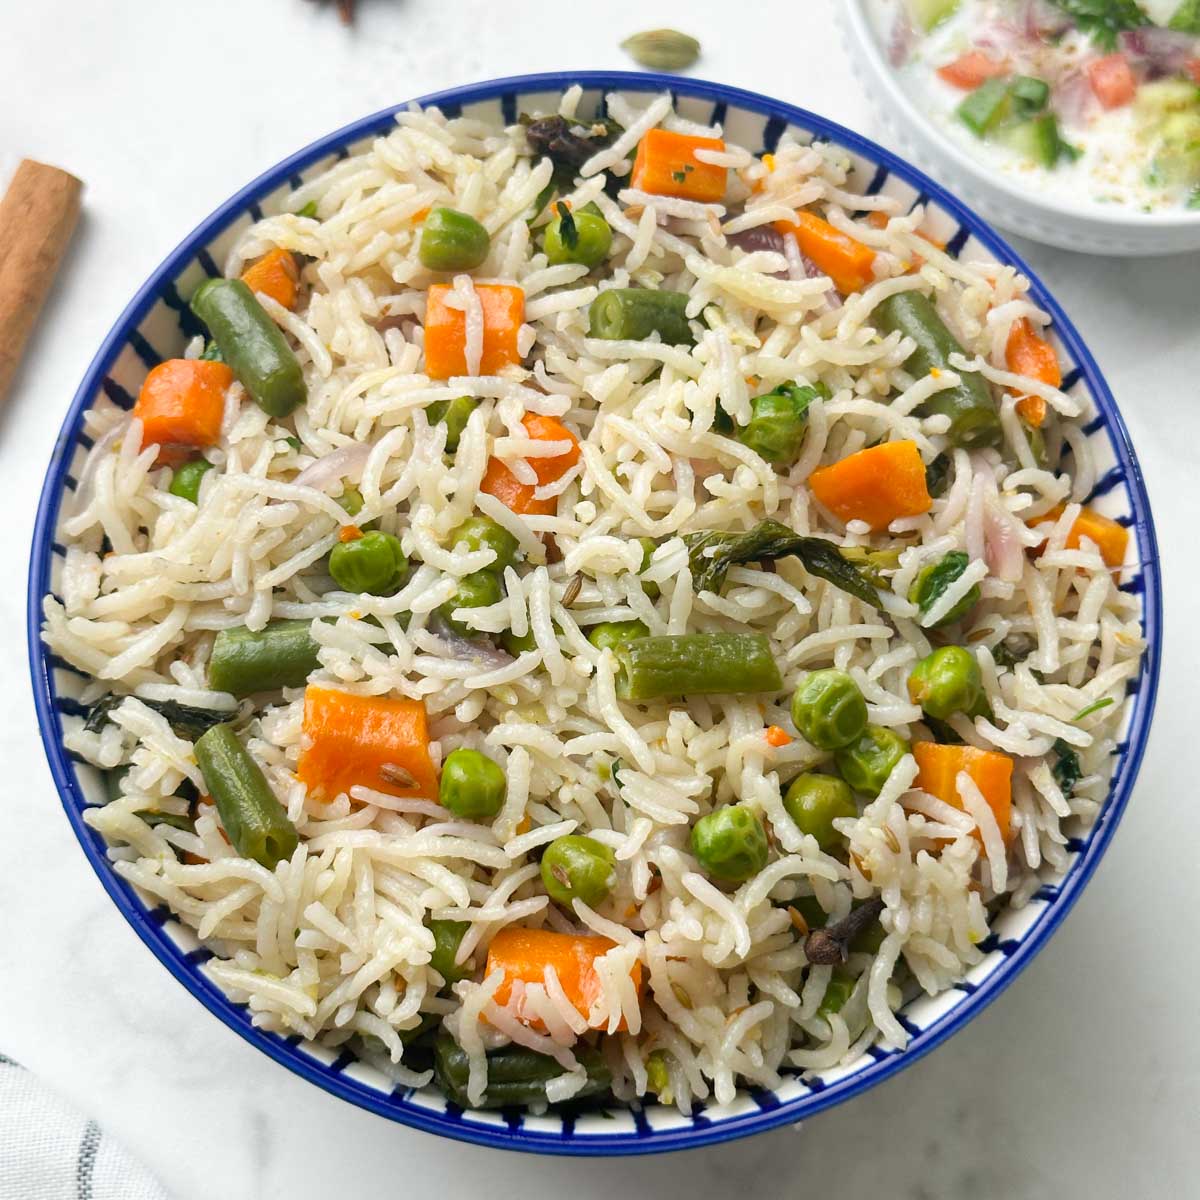  How to Make Veg Pulao Recipe in Tamil